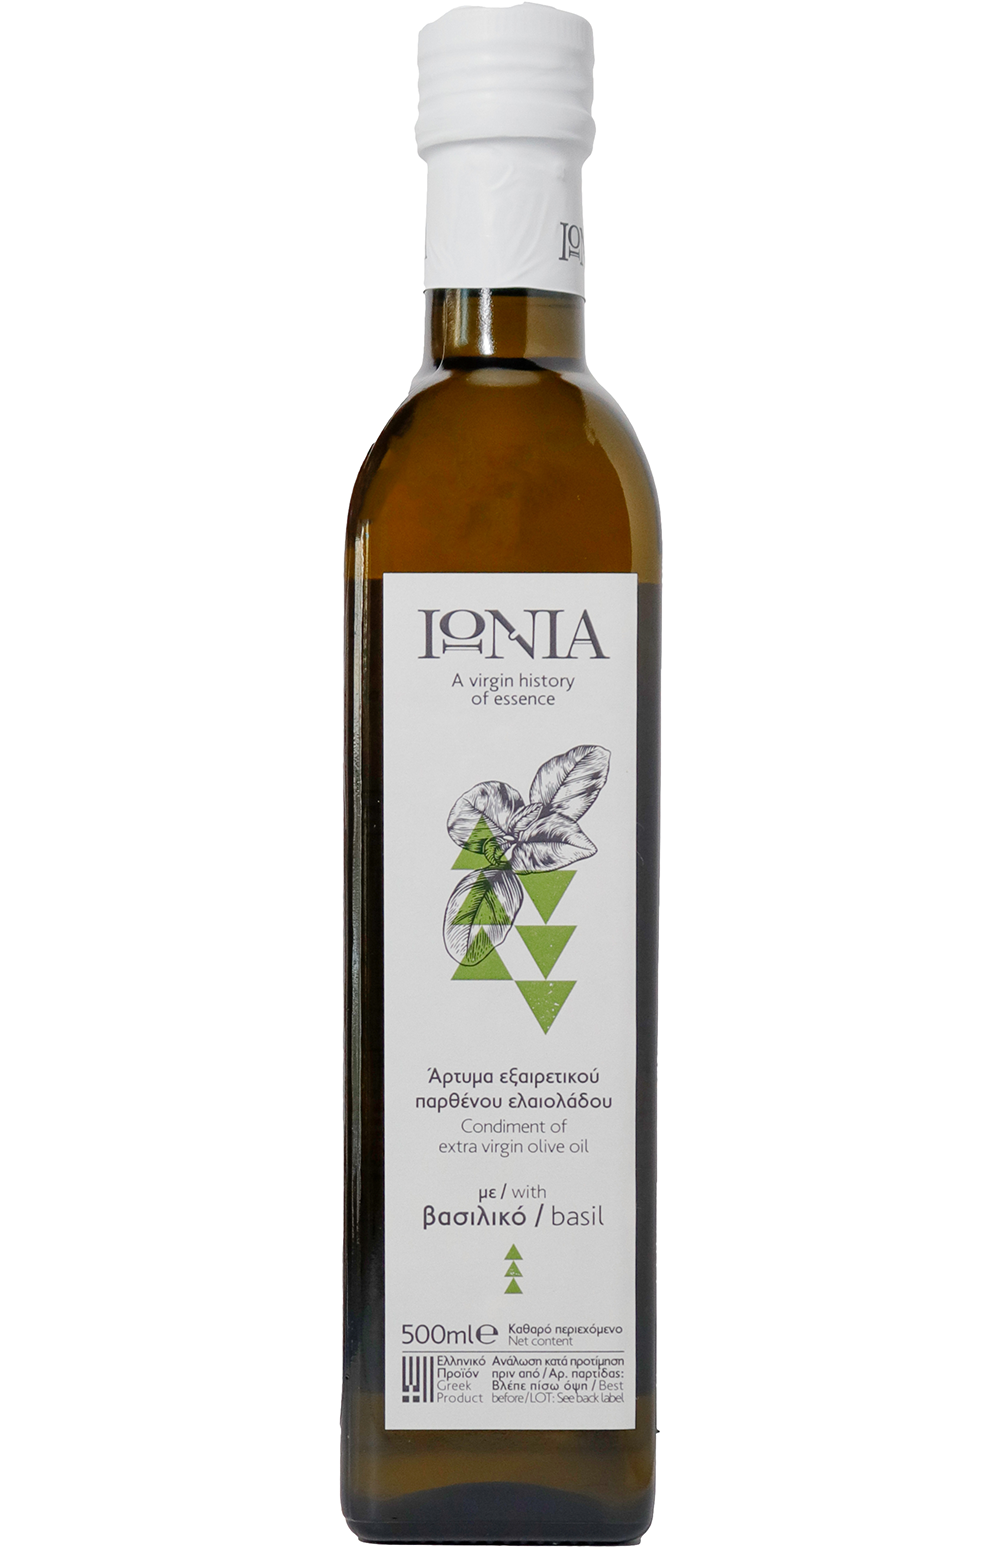 Ionia Condiment Of Extra Virgin Olive Oil With Basil